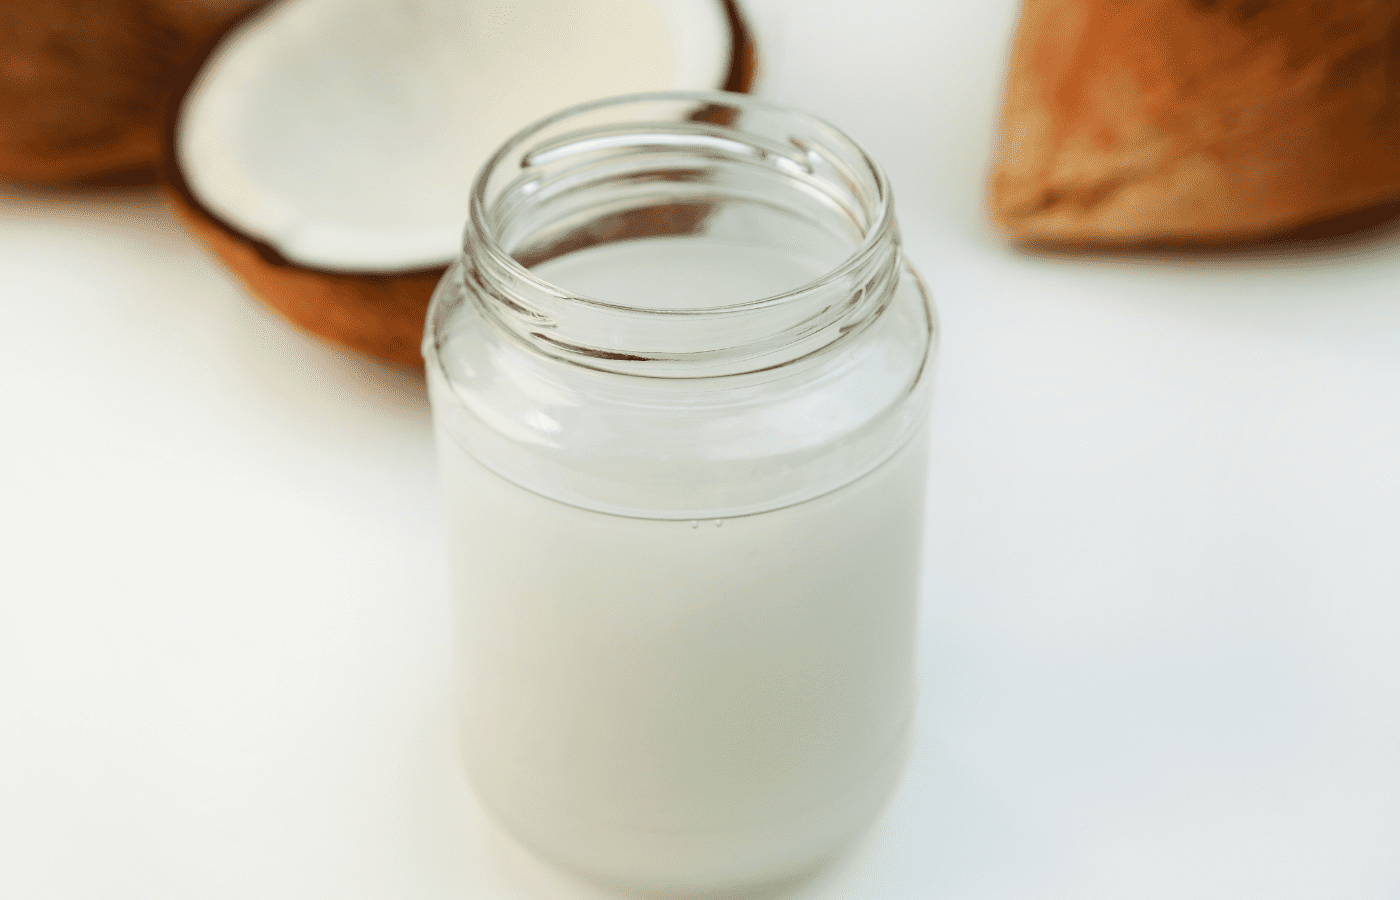 Can Coconut Oil Be Used in a Wax Burner